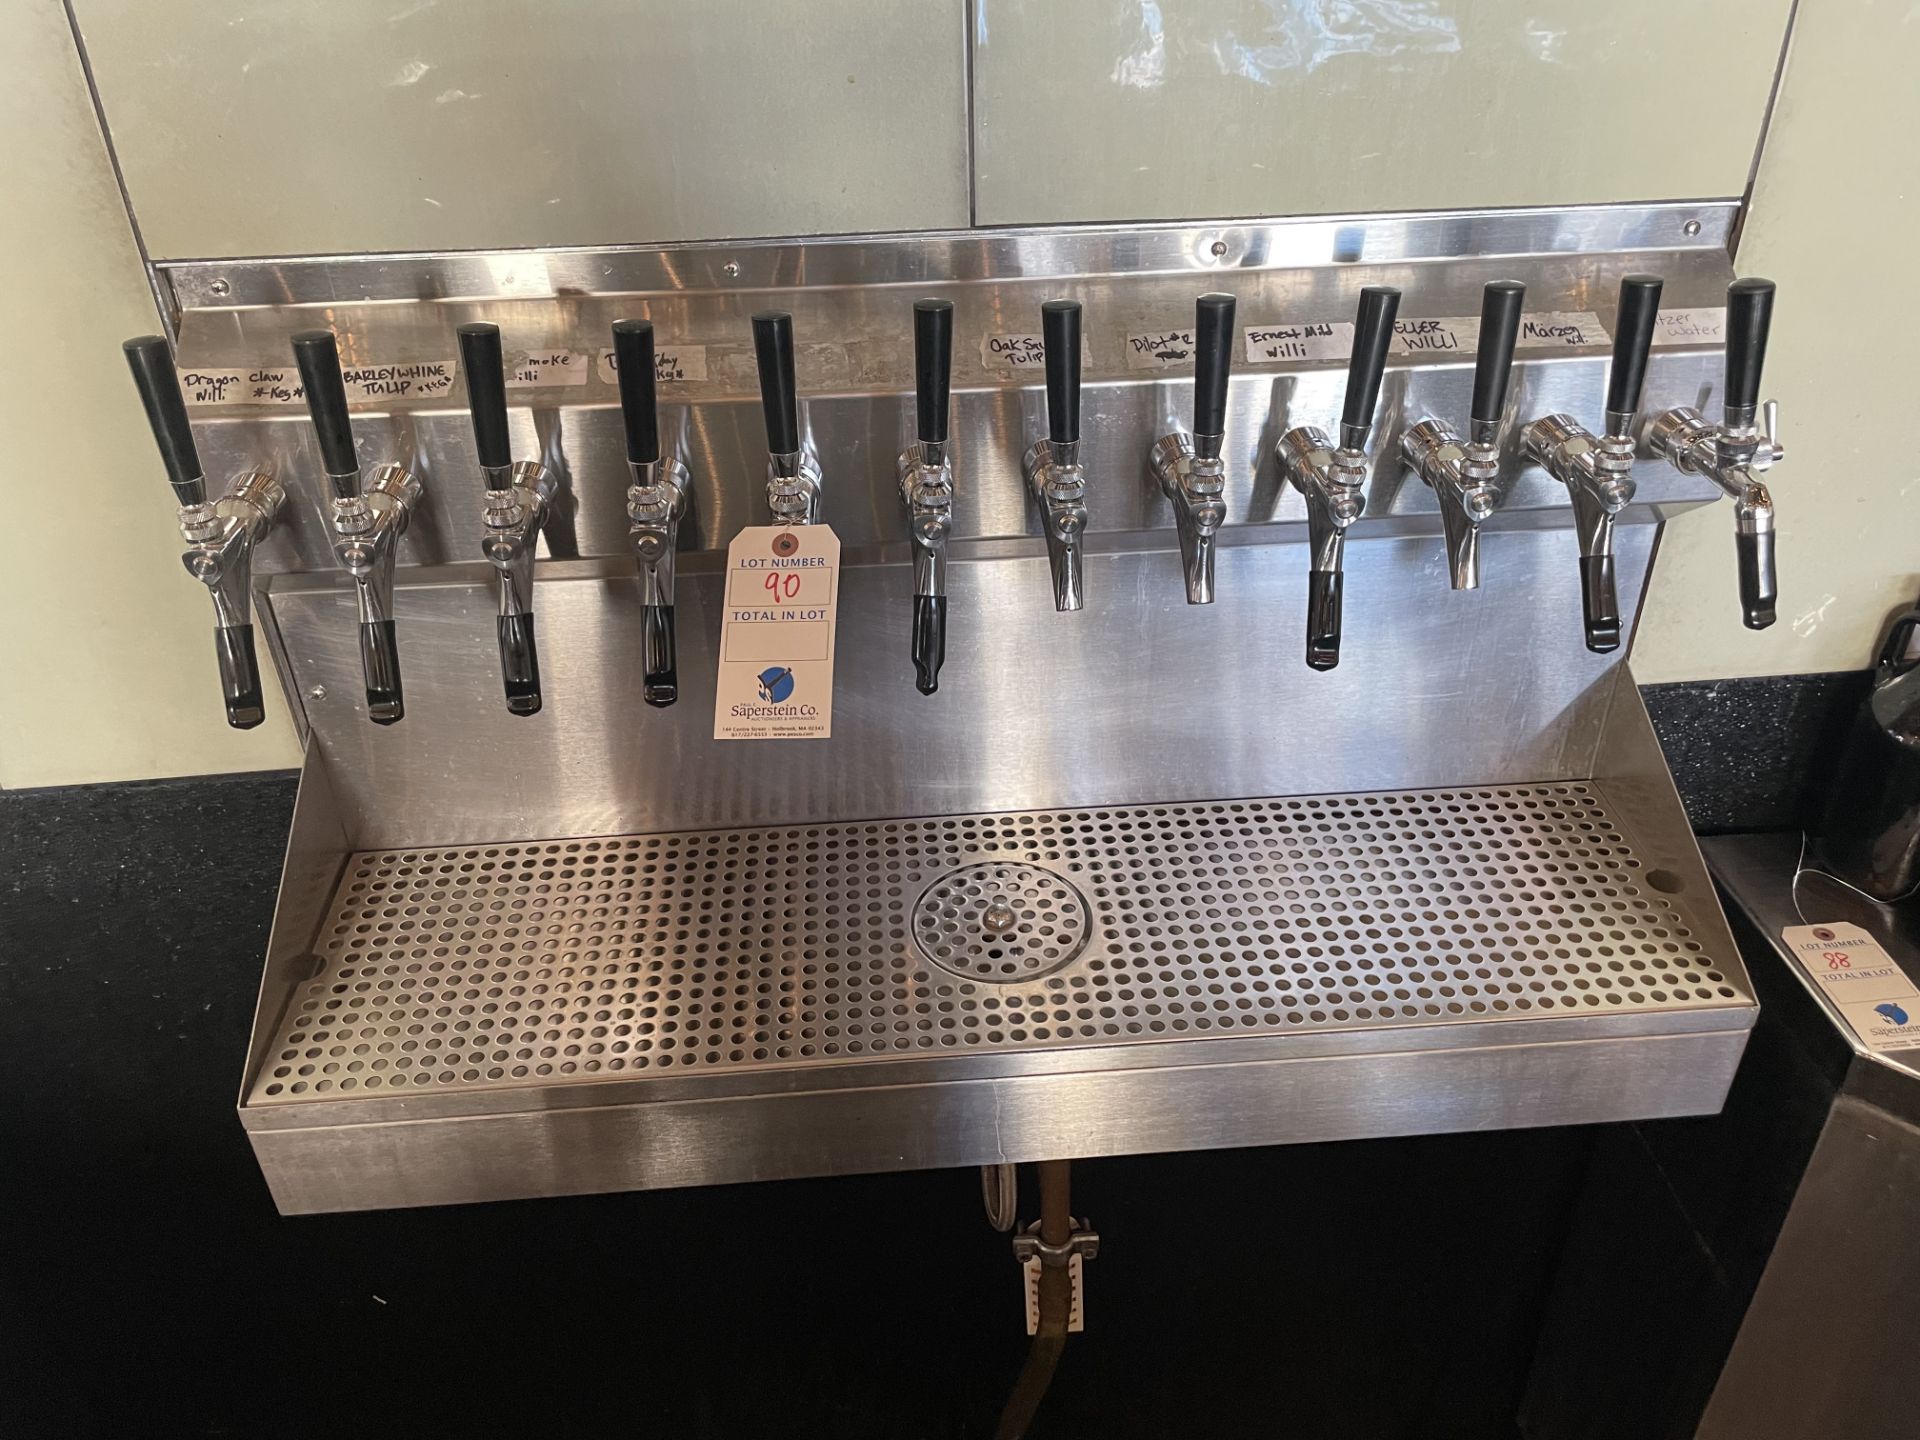 12 Spigot Wall Mounted Beer Tap Dispenser w/Integral Glass Washer, Tap Right Gauges & Manifold - Image 2 of 2